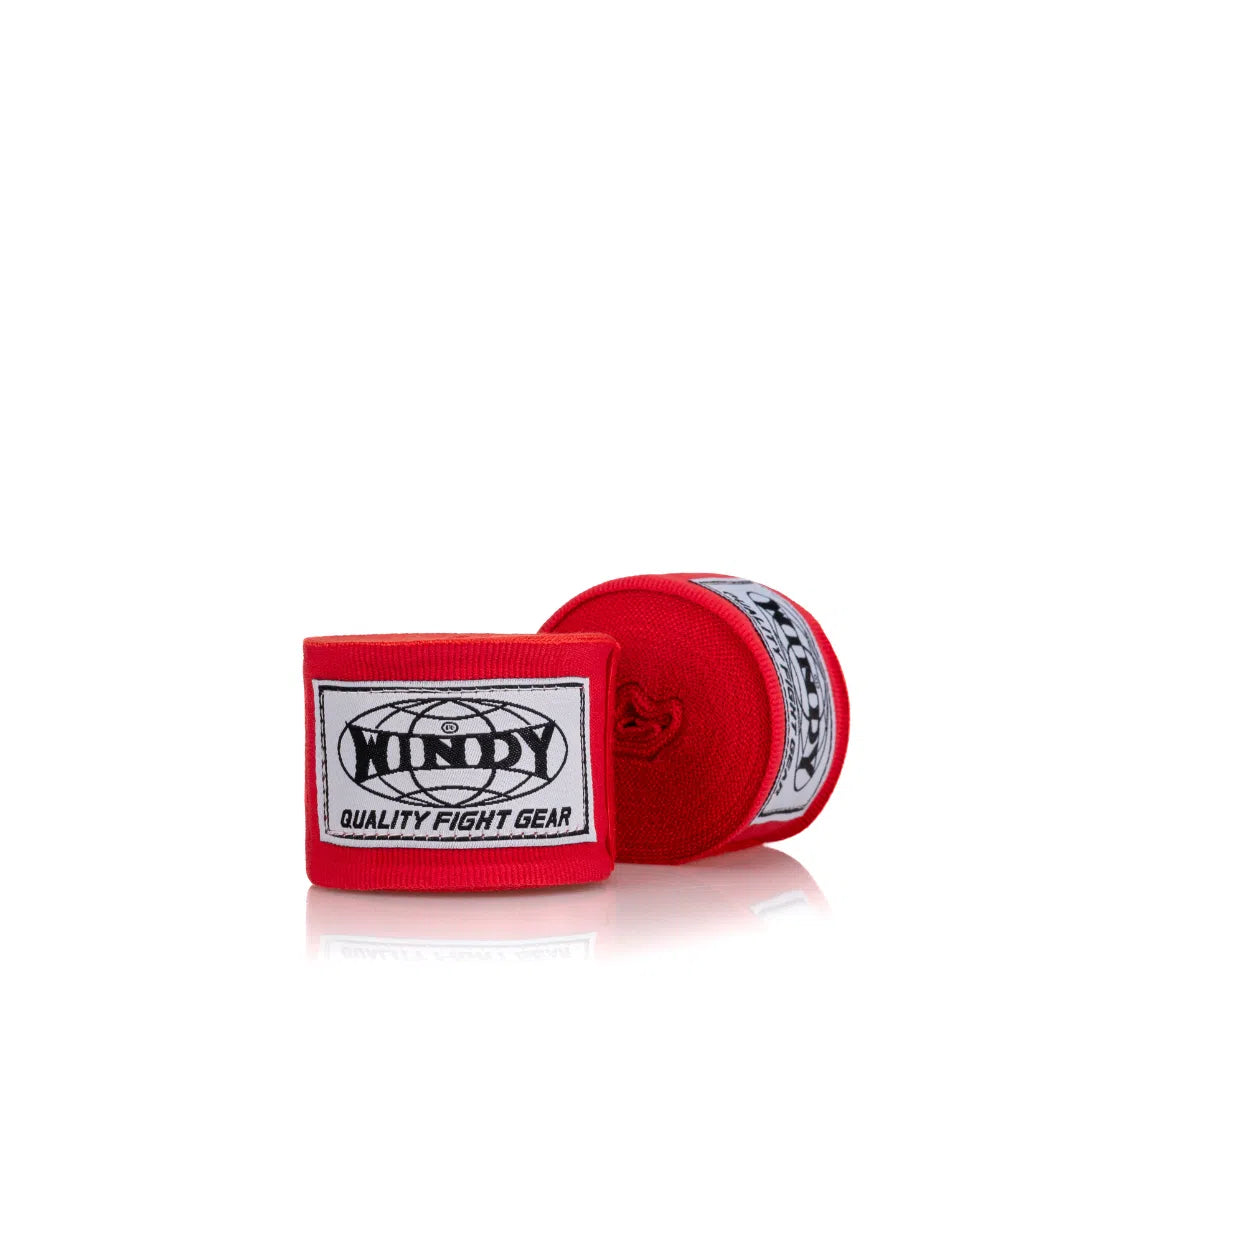 Windy Hand Wraps - Red